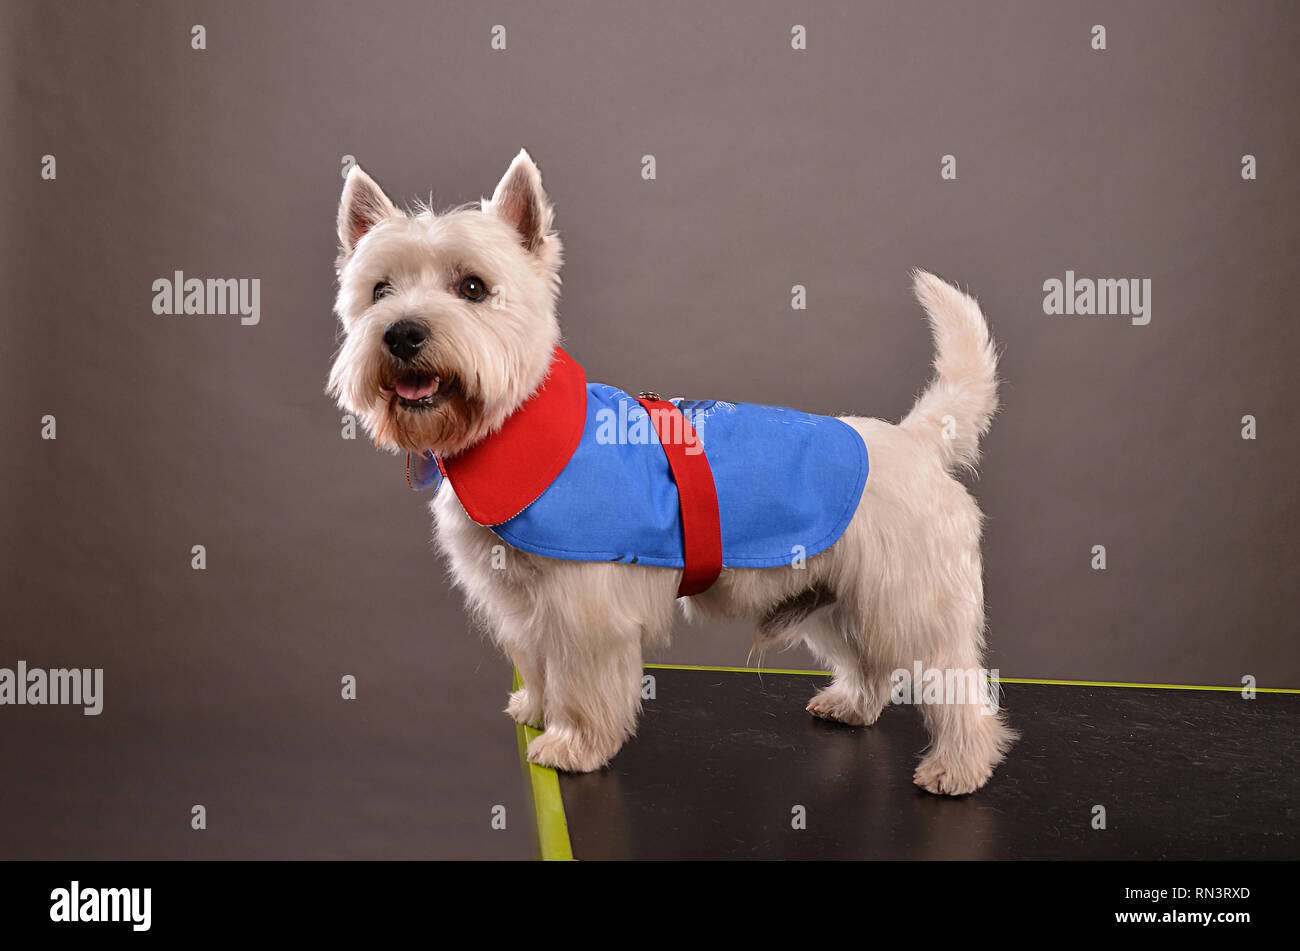 Young Westie dog or West Highland Terrier, standing on table in studio, posing in red and blue jacket, gray background Stock Photo